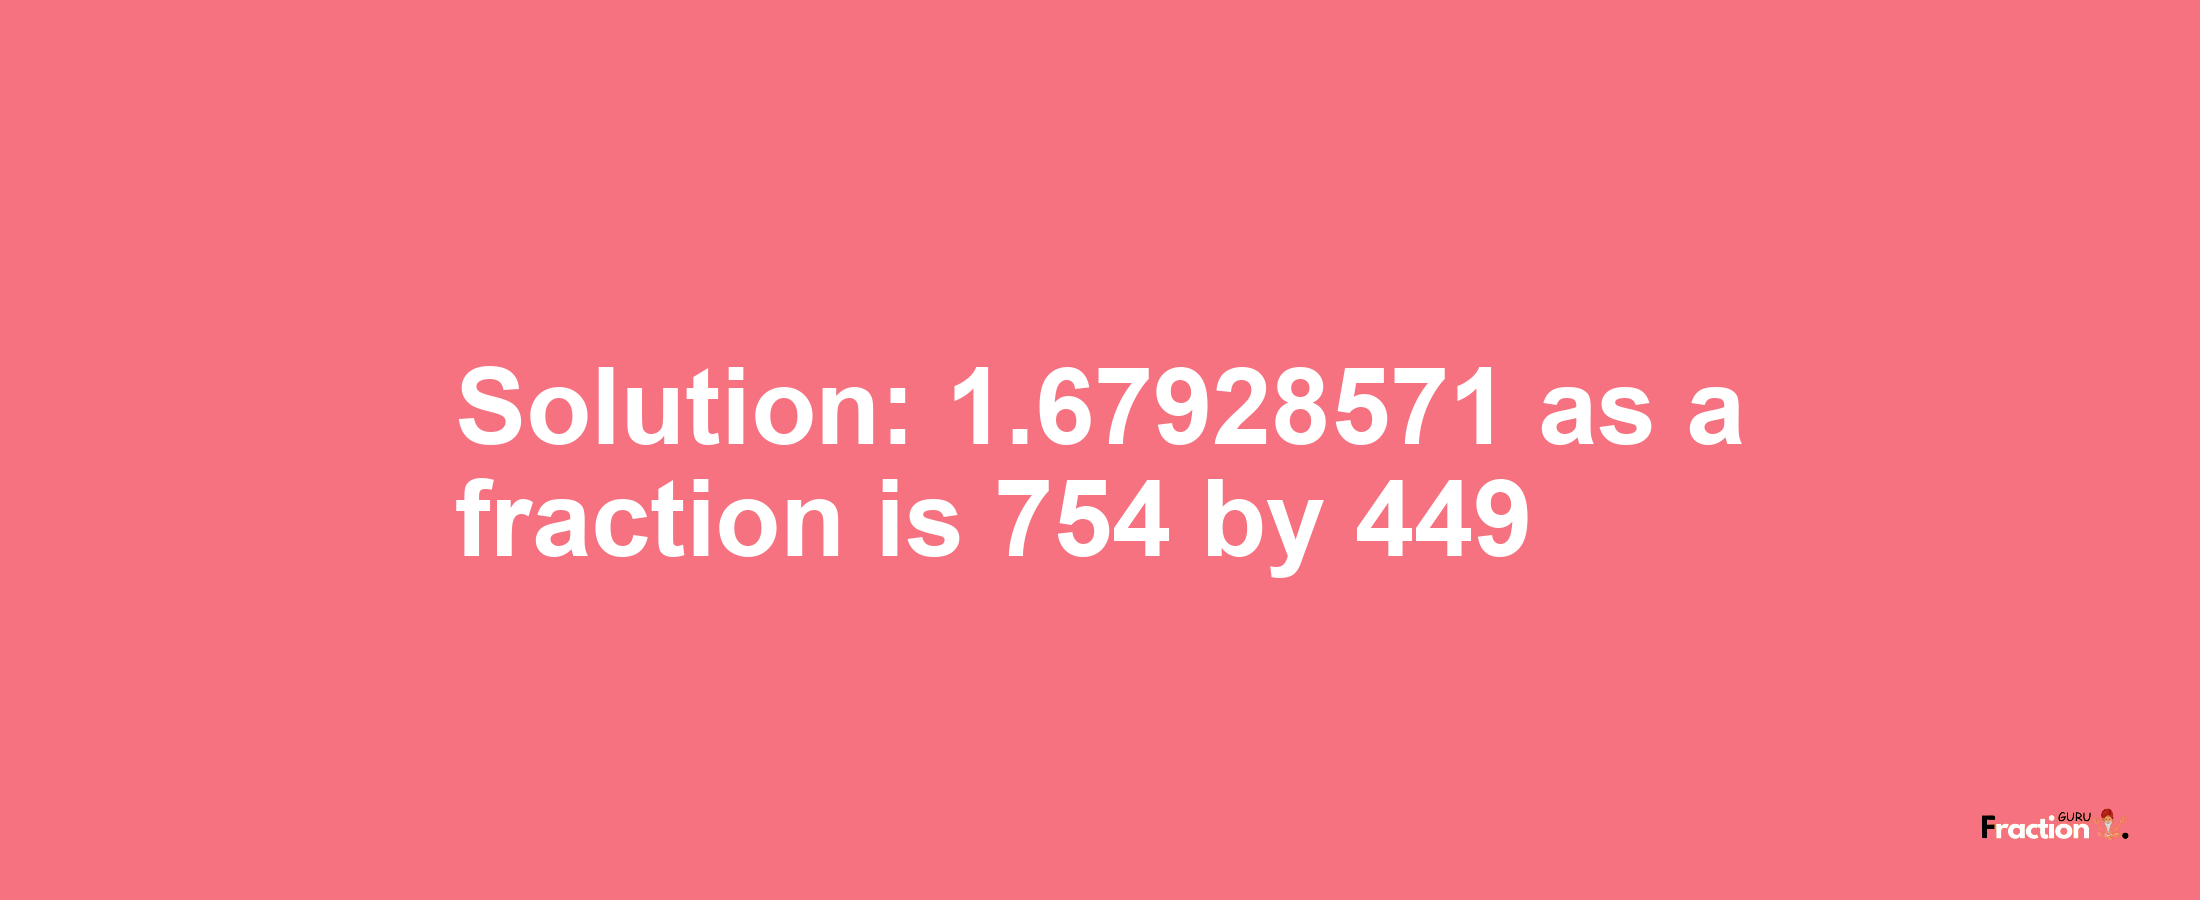 Solution:1.67928571 as a fraction is 754/449